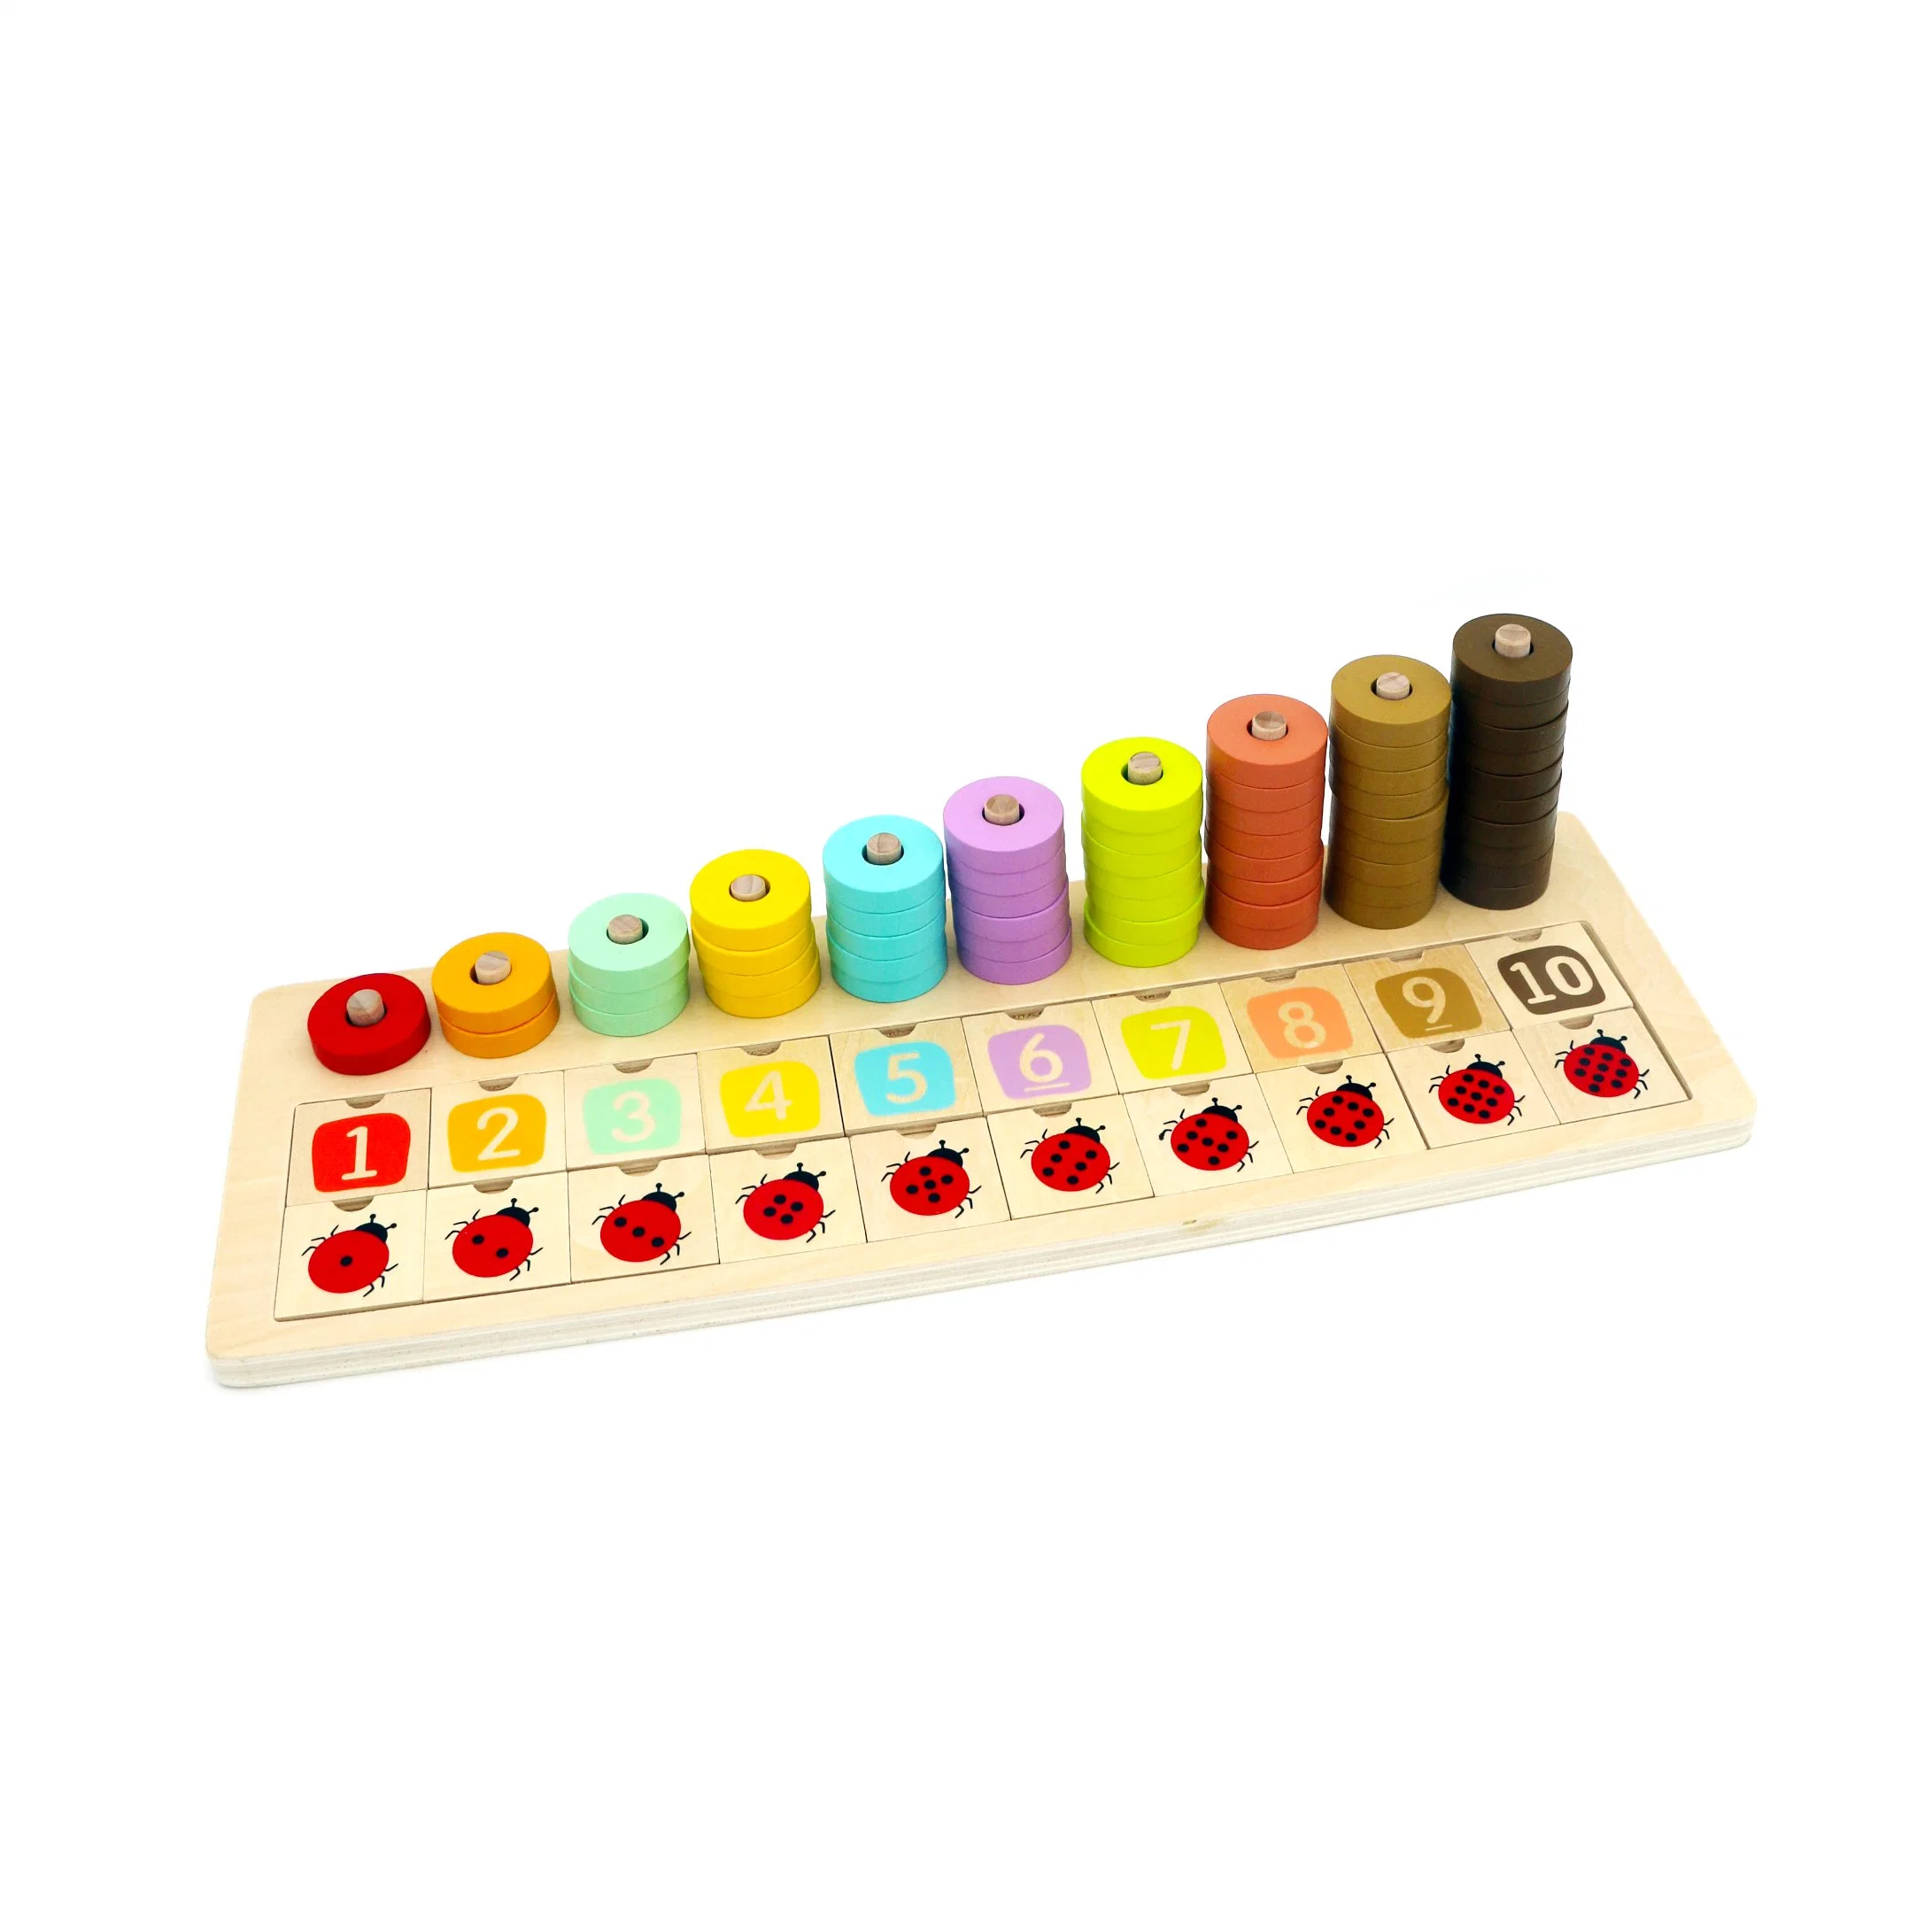 Wooden Stacking Counting Easel Educational Wood Toys for Kids and Children